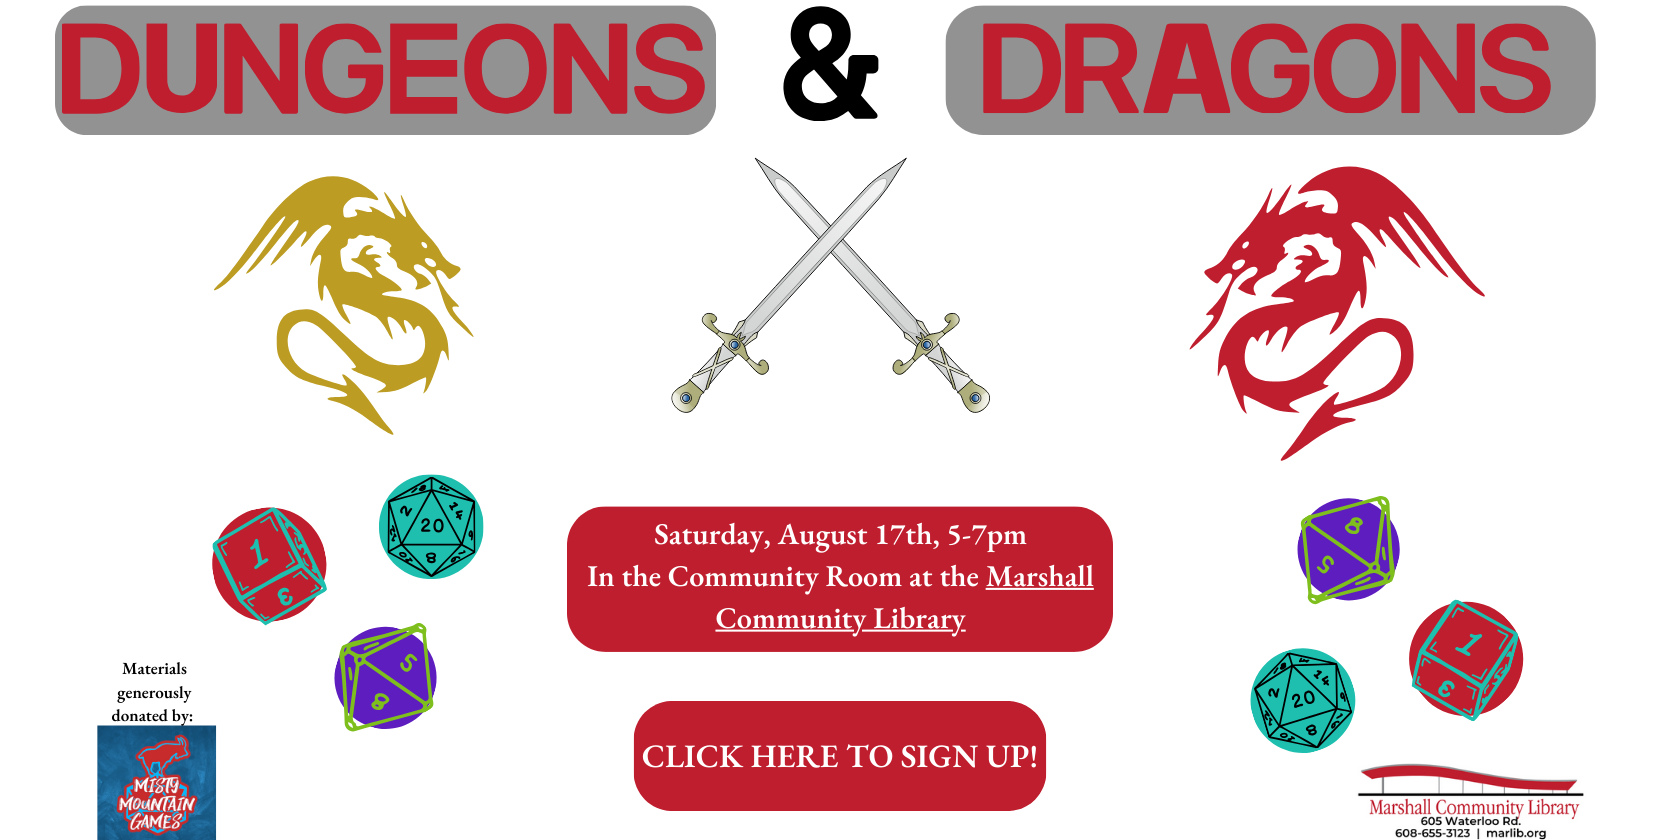 DnD night: Saturday, August 17th, 5 - 7 PM